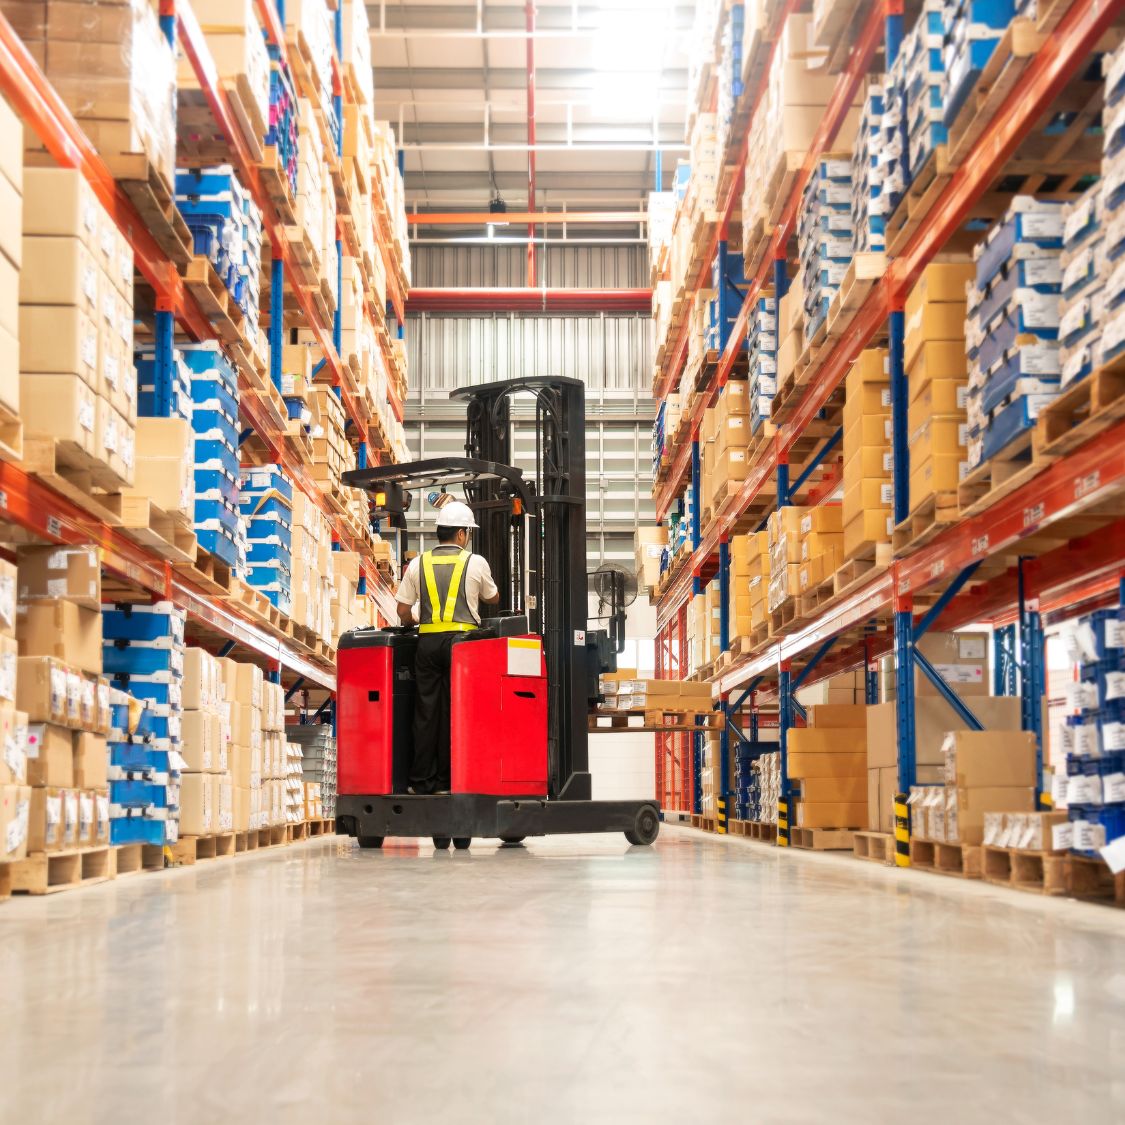 Common Safety Risks That Impact Commercial Warehouses